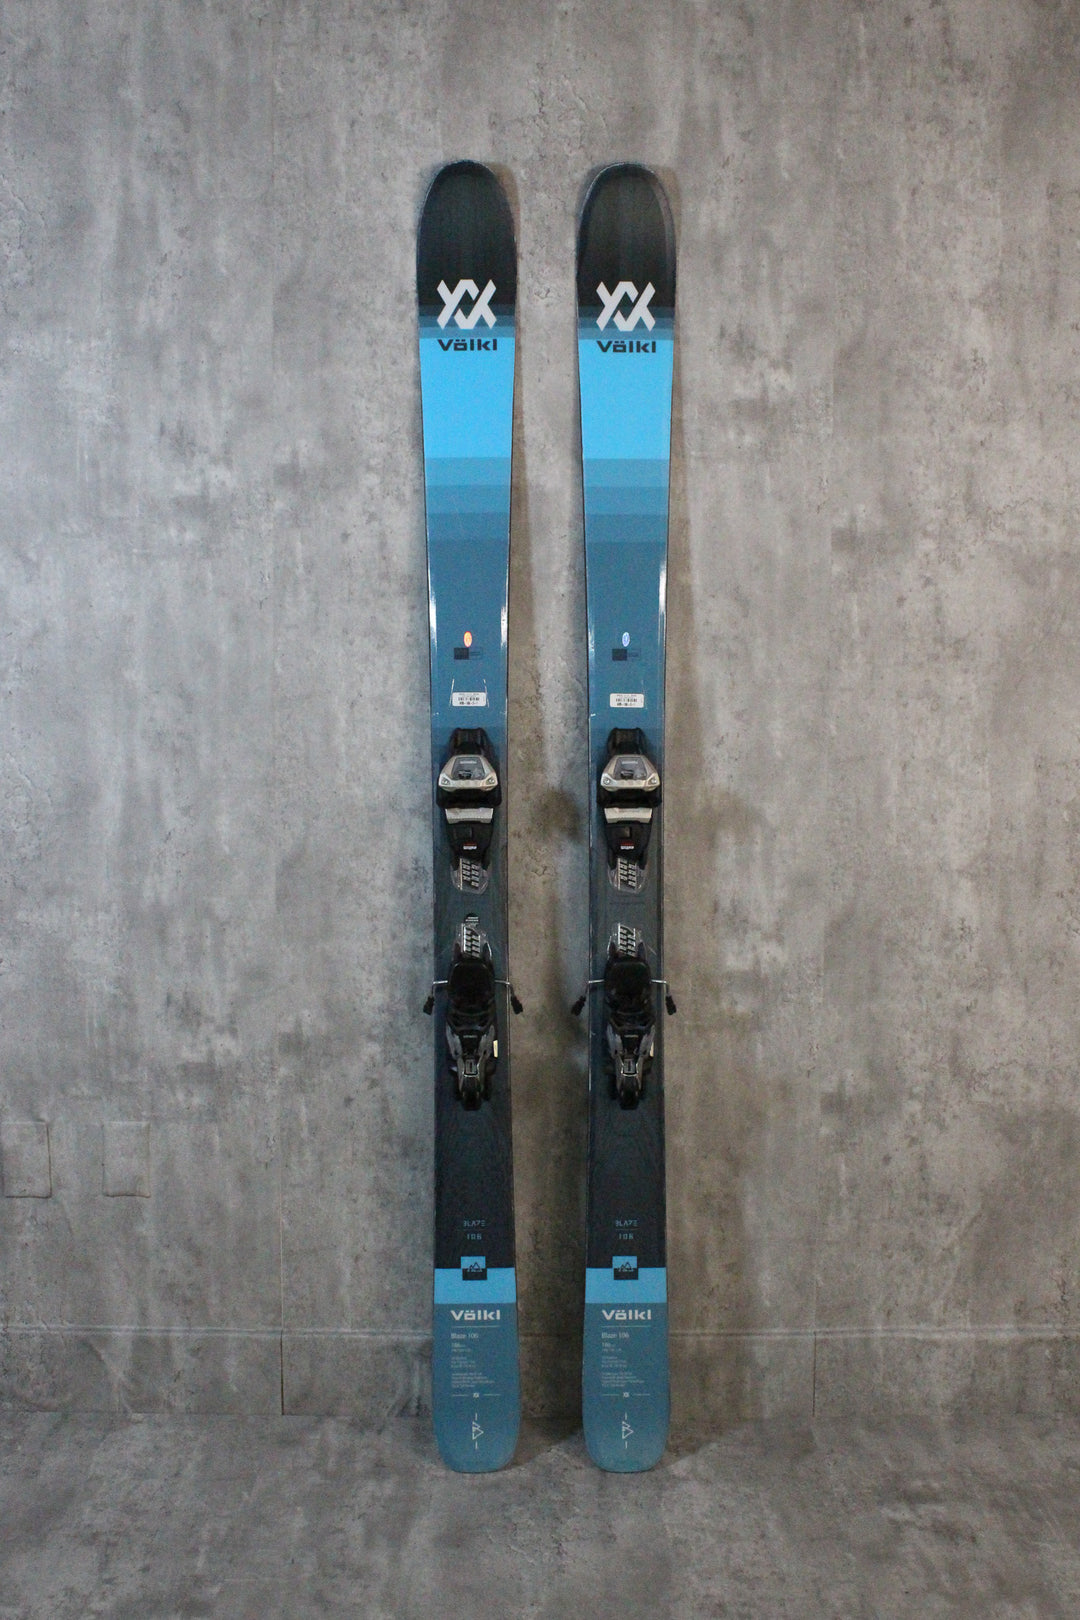 The Blaze 106 is a lightweight, agile powder ski with a thin Titanal Binding Platform for effortless power and dynamic turns. Its three-radius sidecut and Suspension Tip enhance flotation and stability in various conditions. Ideal for both resort skiing and freeride touring. Available as used skis in Park City.